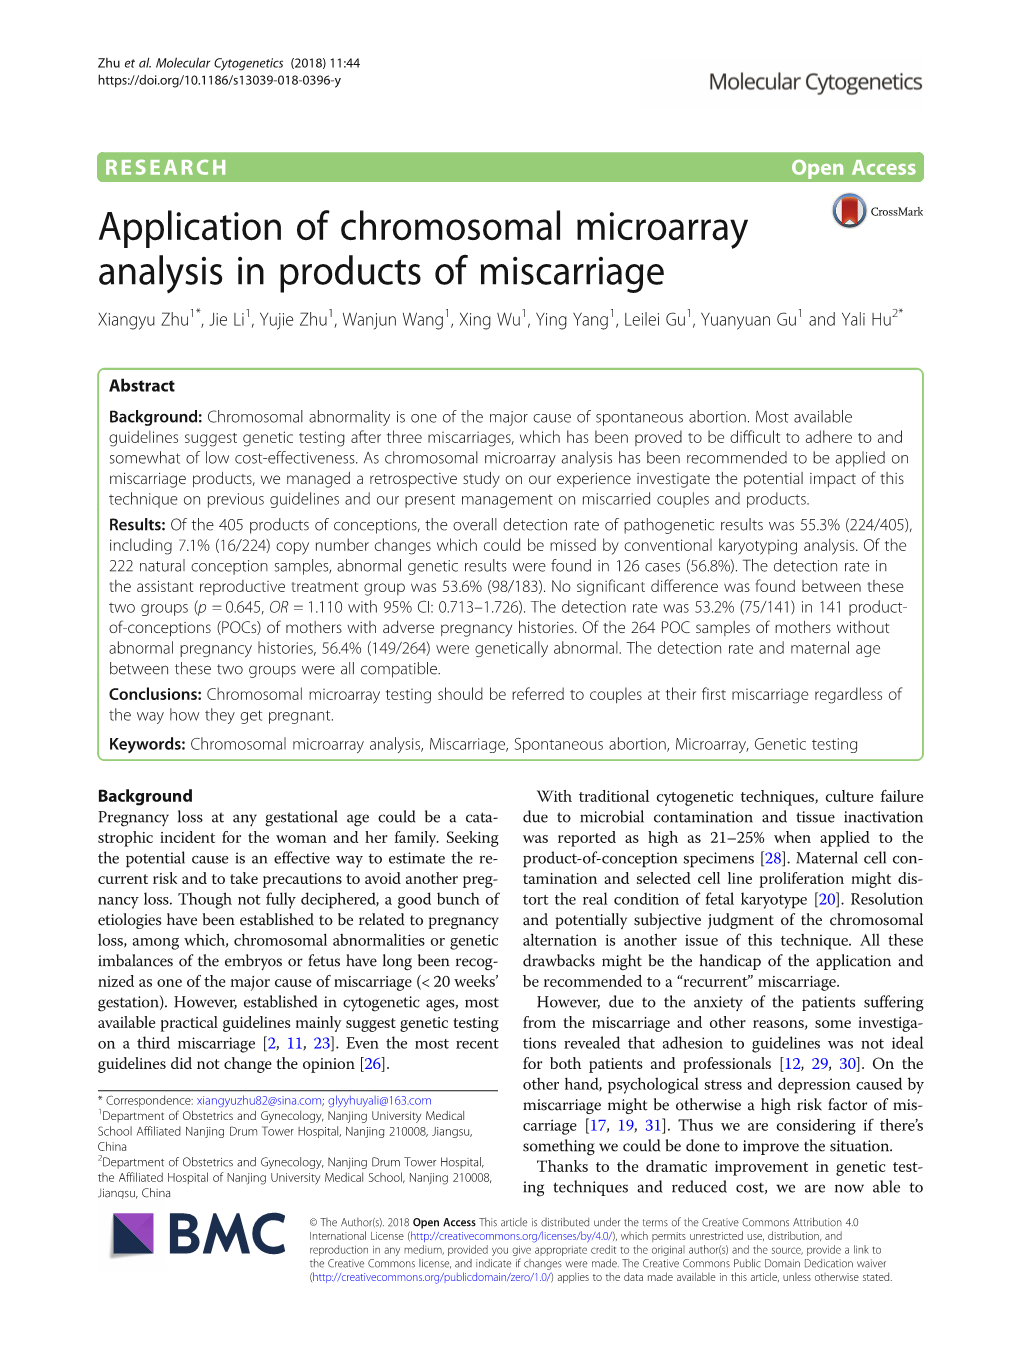 Application of Chromosomal Microarray Analysis in Products Of